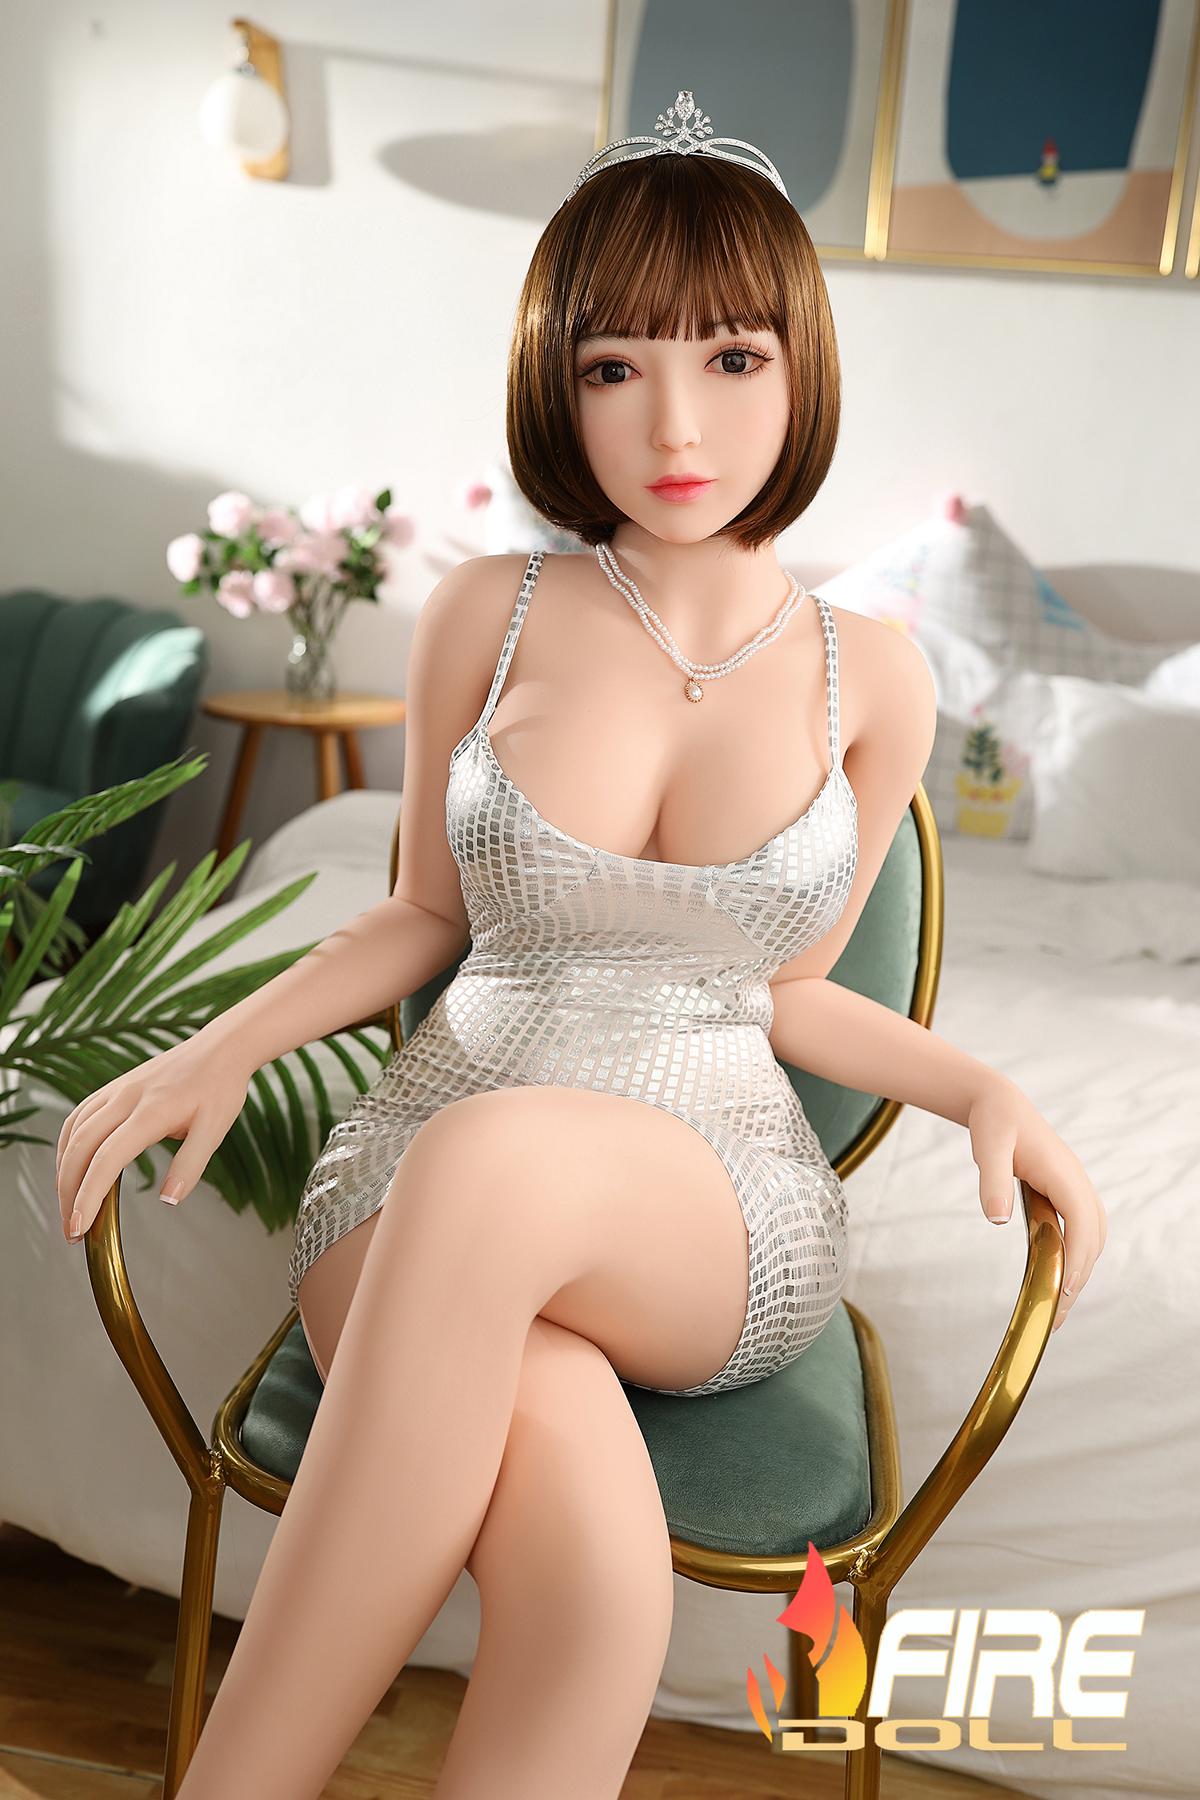 Sex doll Mola as shown | Remaining stock